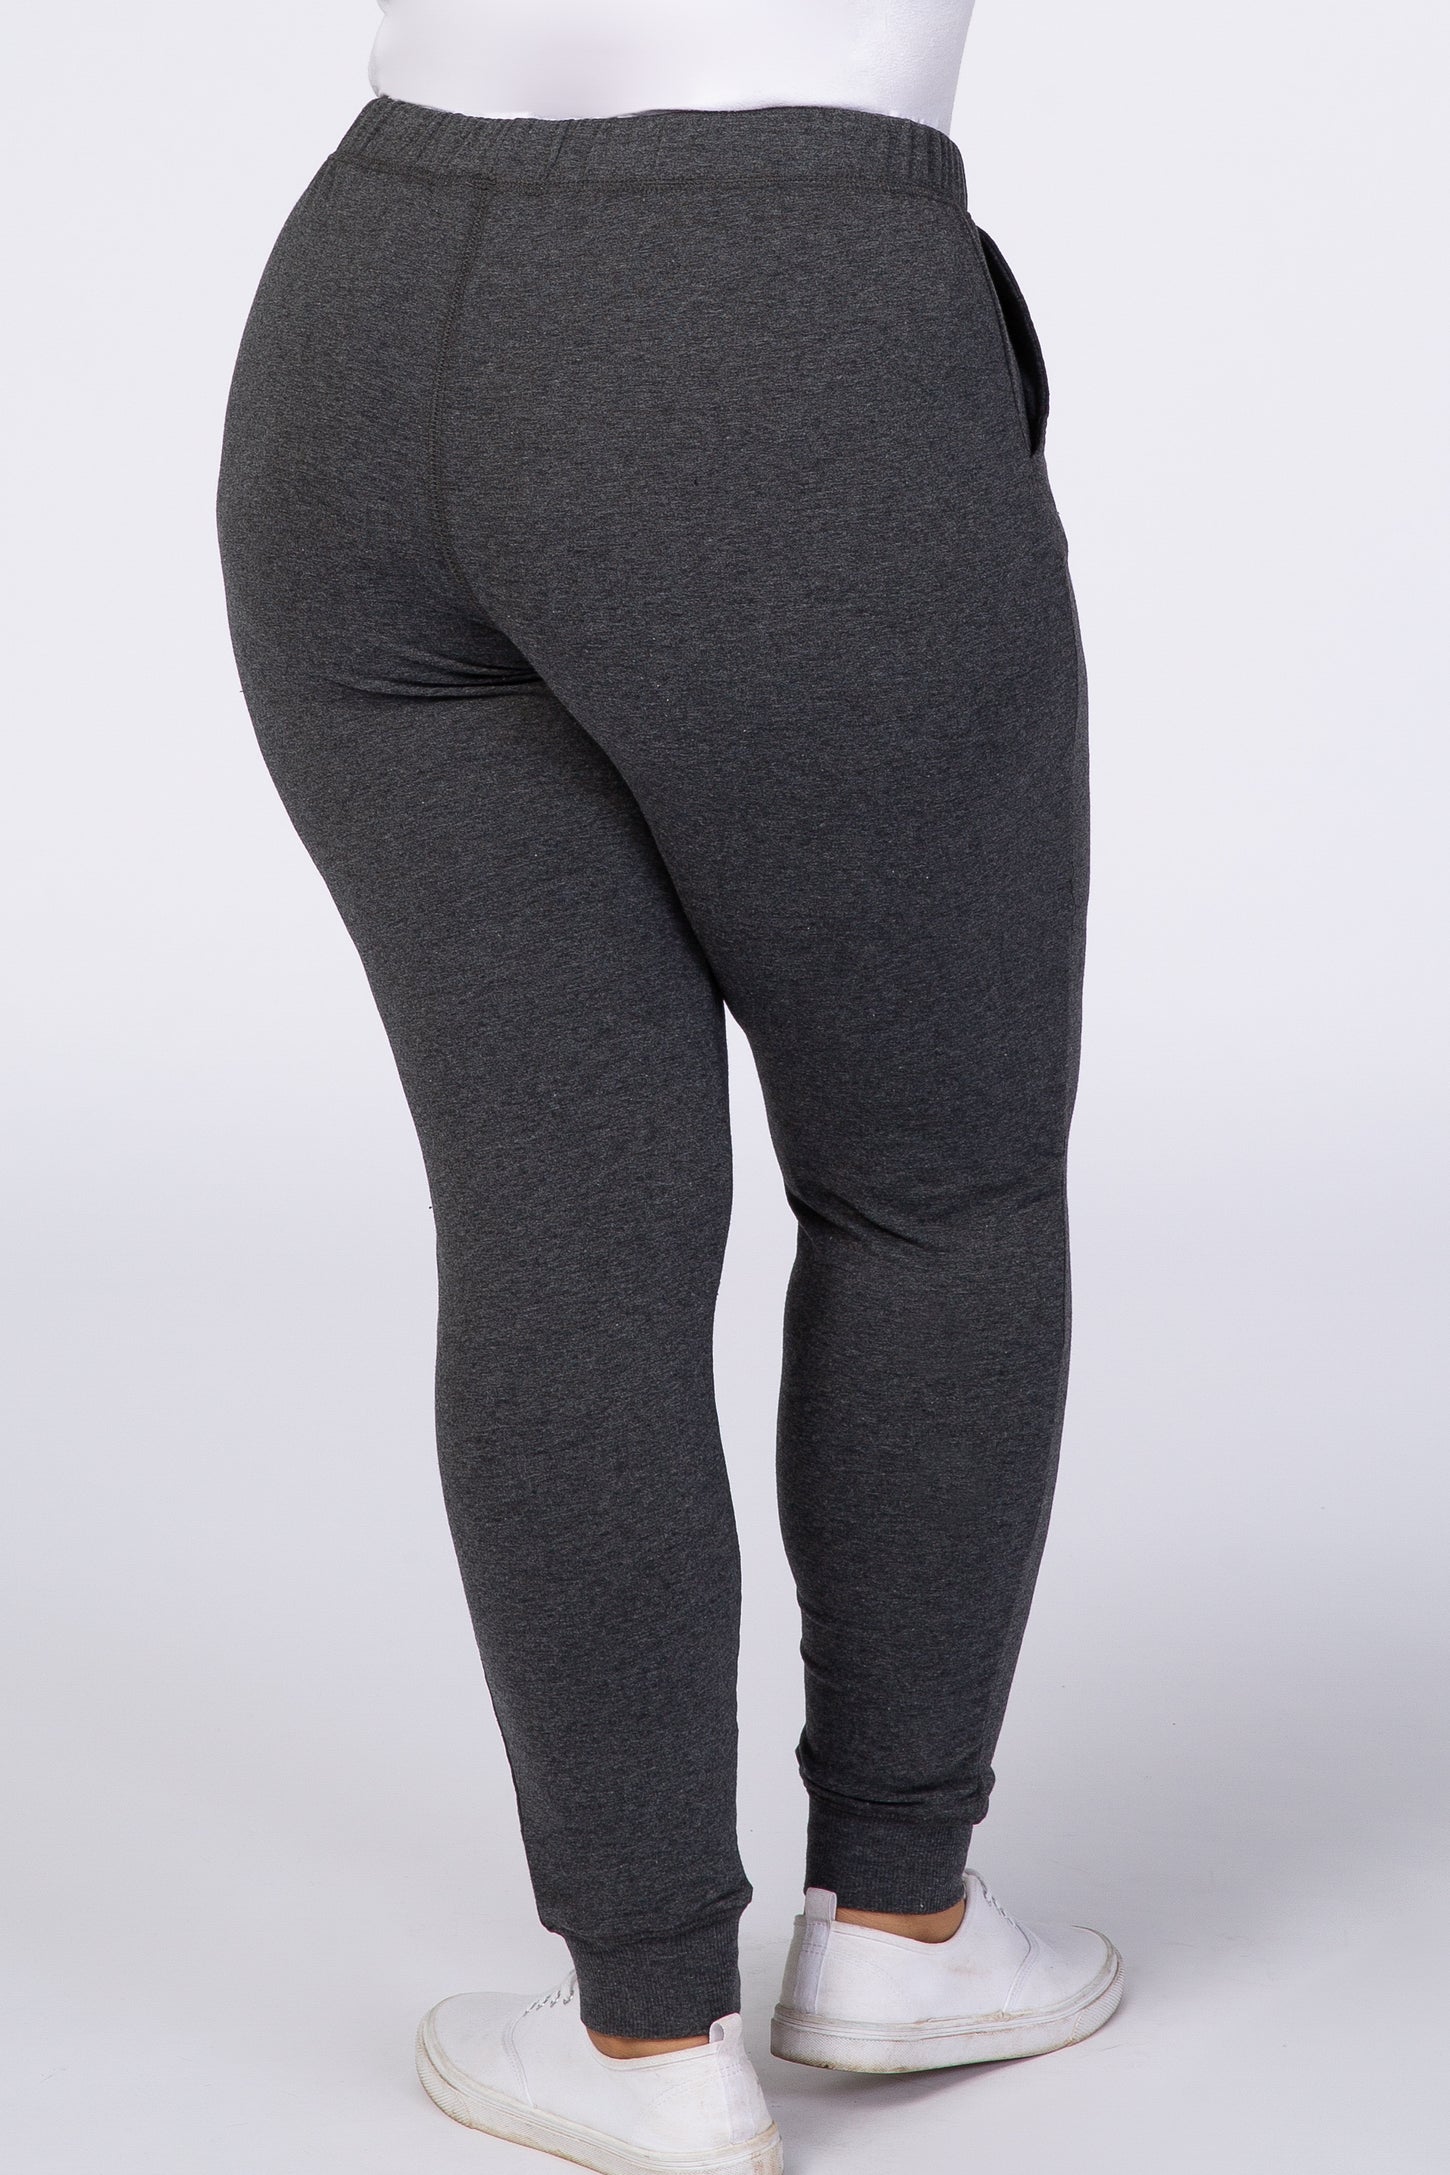 Charcoal Solid Hued Drawstring Plus Joggers